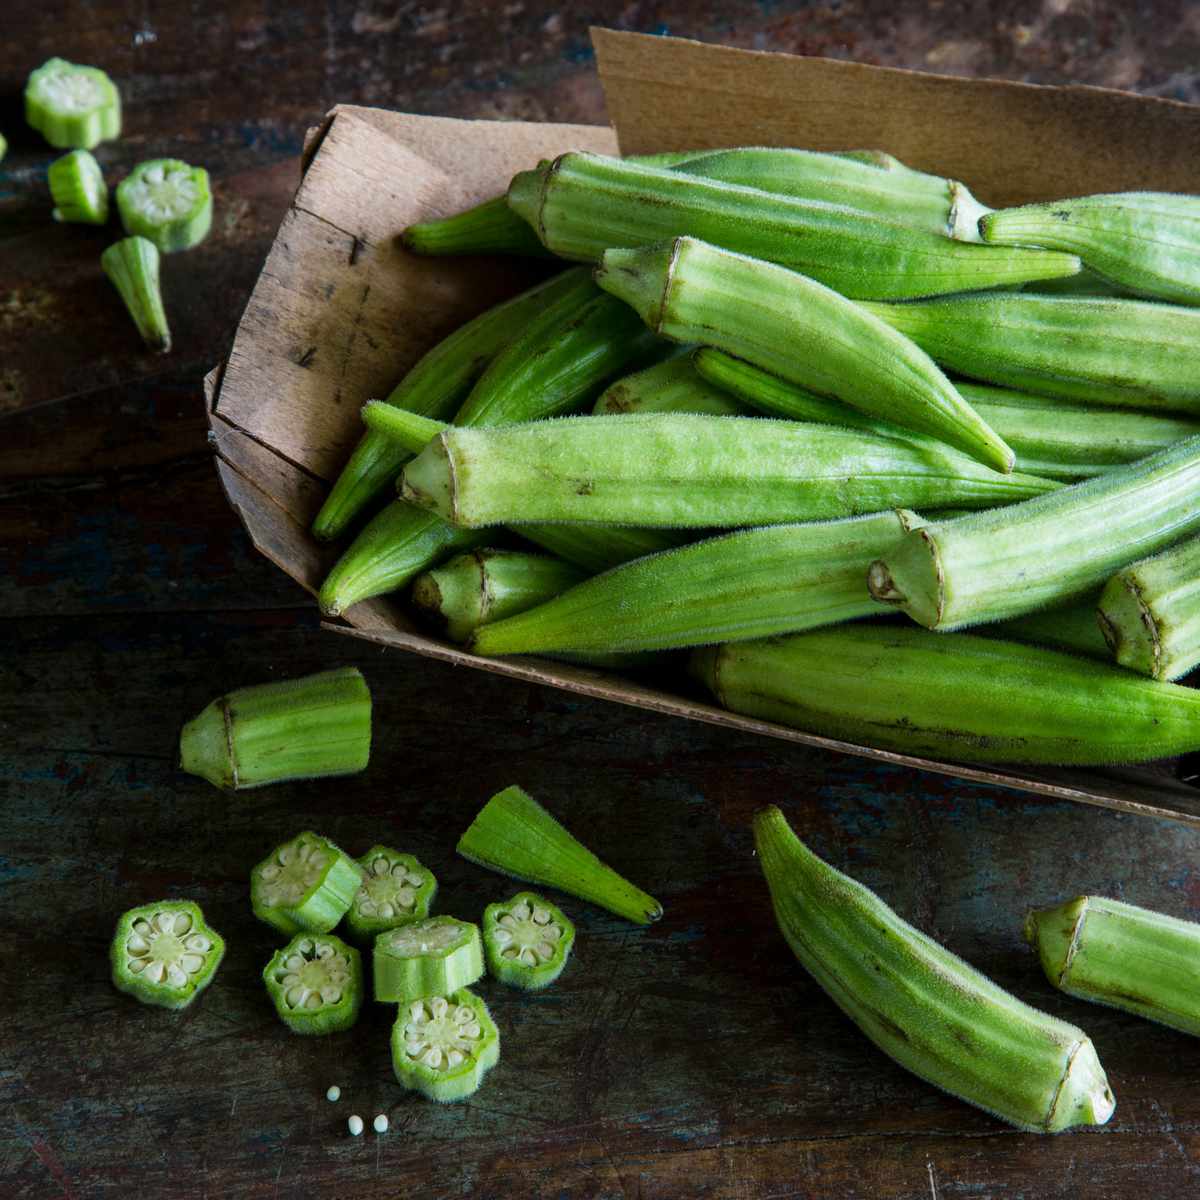 okra in a box and on a table